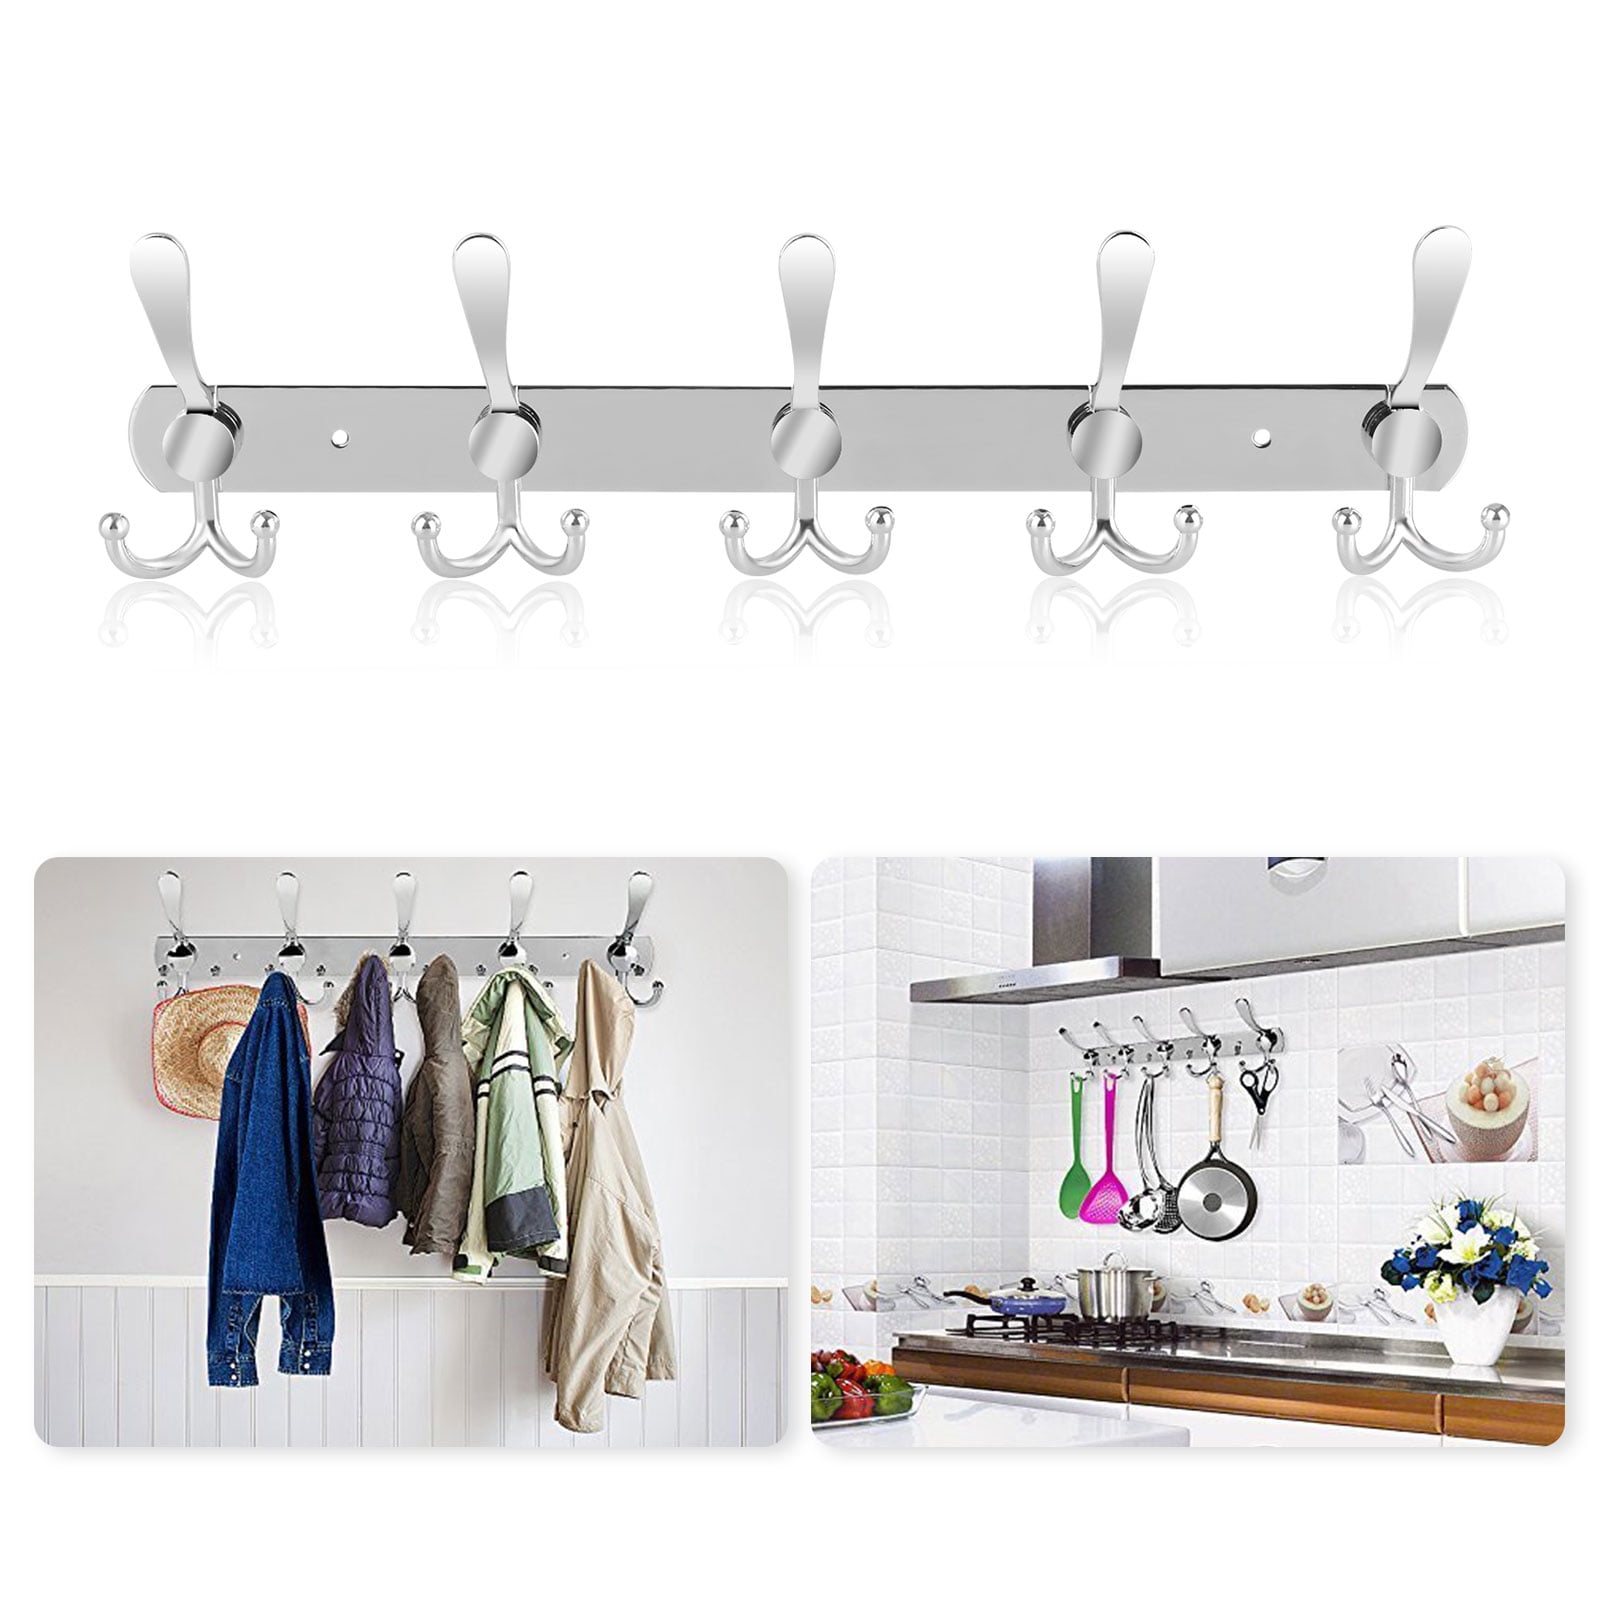 JVLM HOME Expandable Wooden Hanger Accordion Style Wood Wall Rack 2" Peg 2PACK